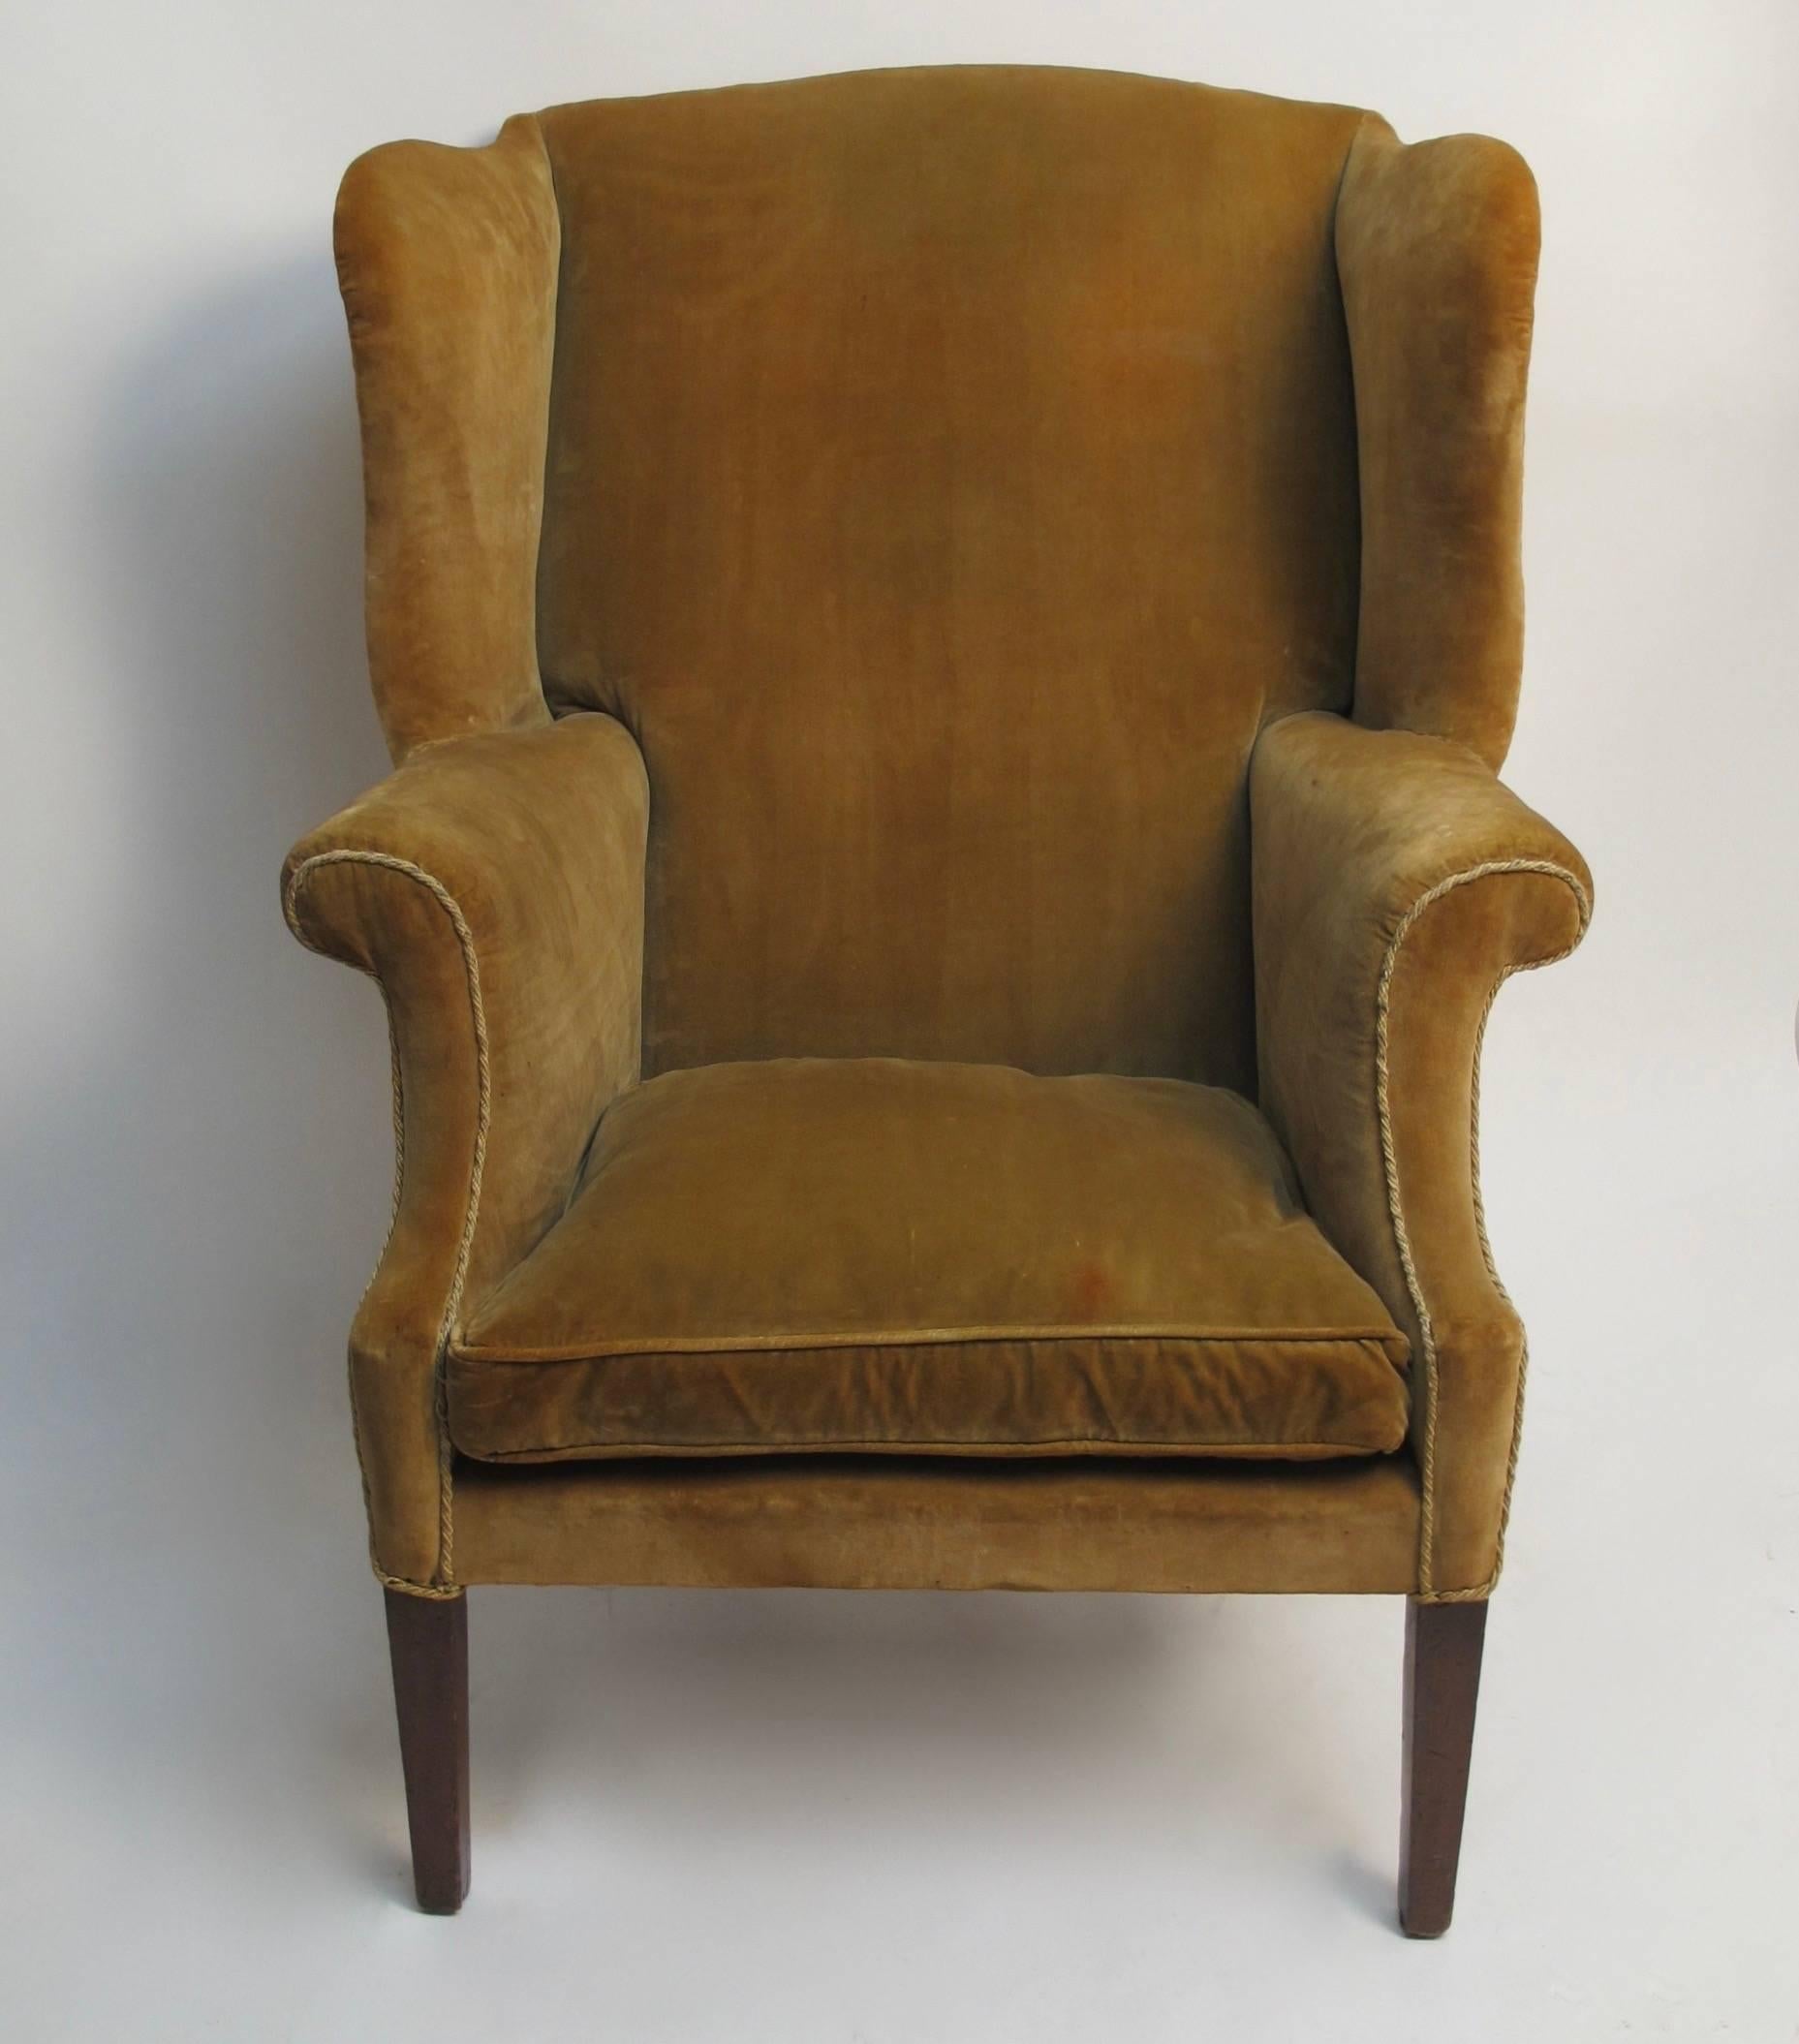 18th century wingback chair